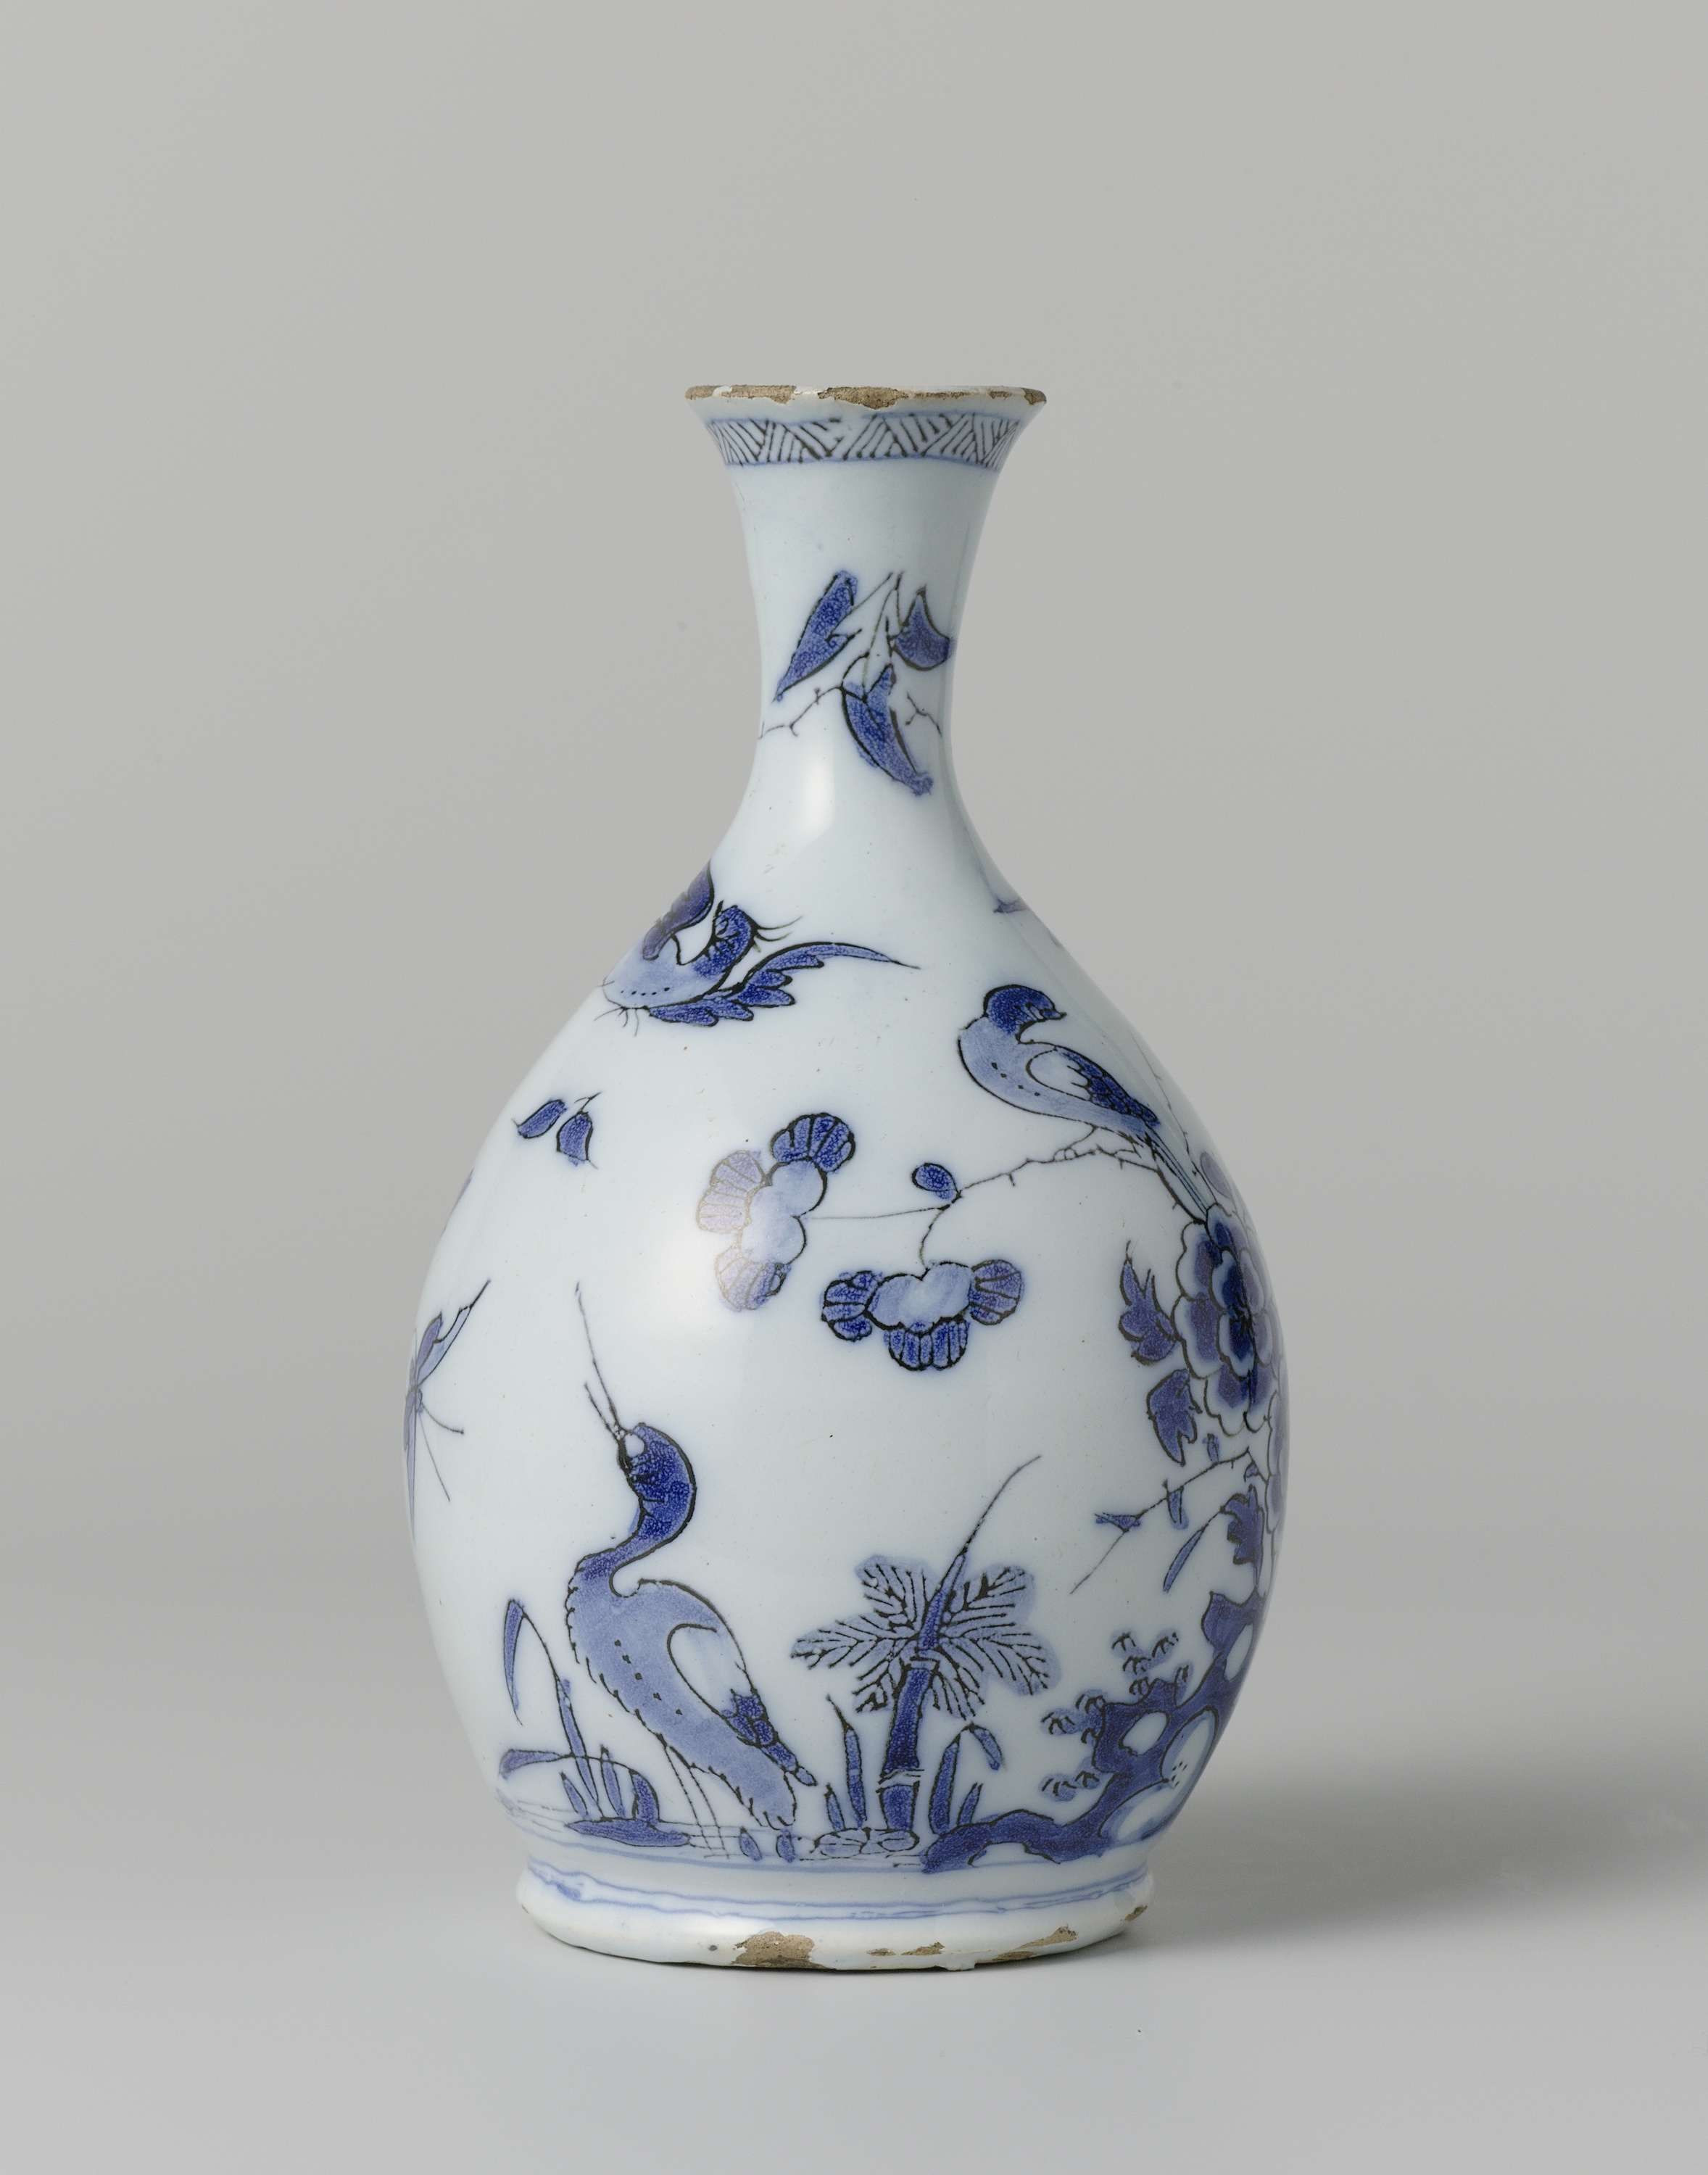 13 Cute Double Gourd Vase 2024 free download double gourd vase of het moriaanshooft vase het moriaanshooft rochus jacobsz pertaining to hoppesteijn place delft dating c 1685 c 1690 faience vase with the chinese porcelain inspired flowe